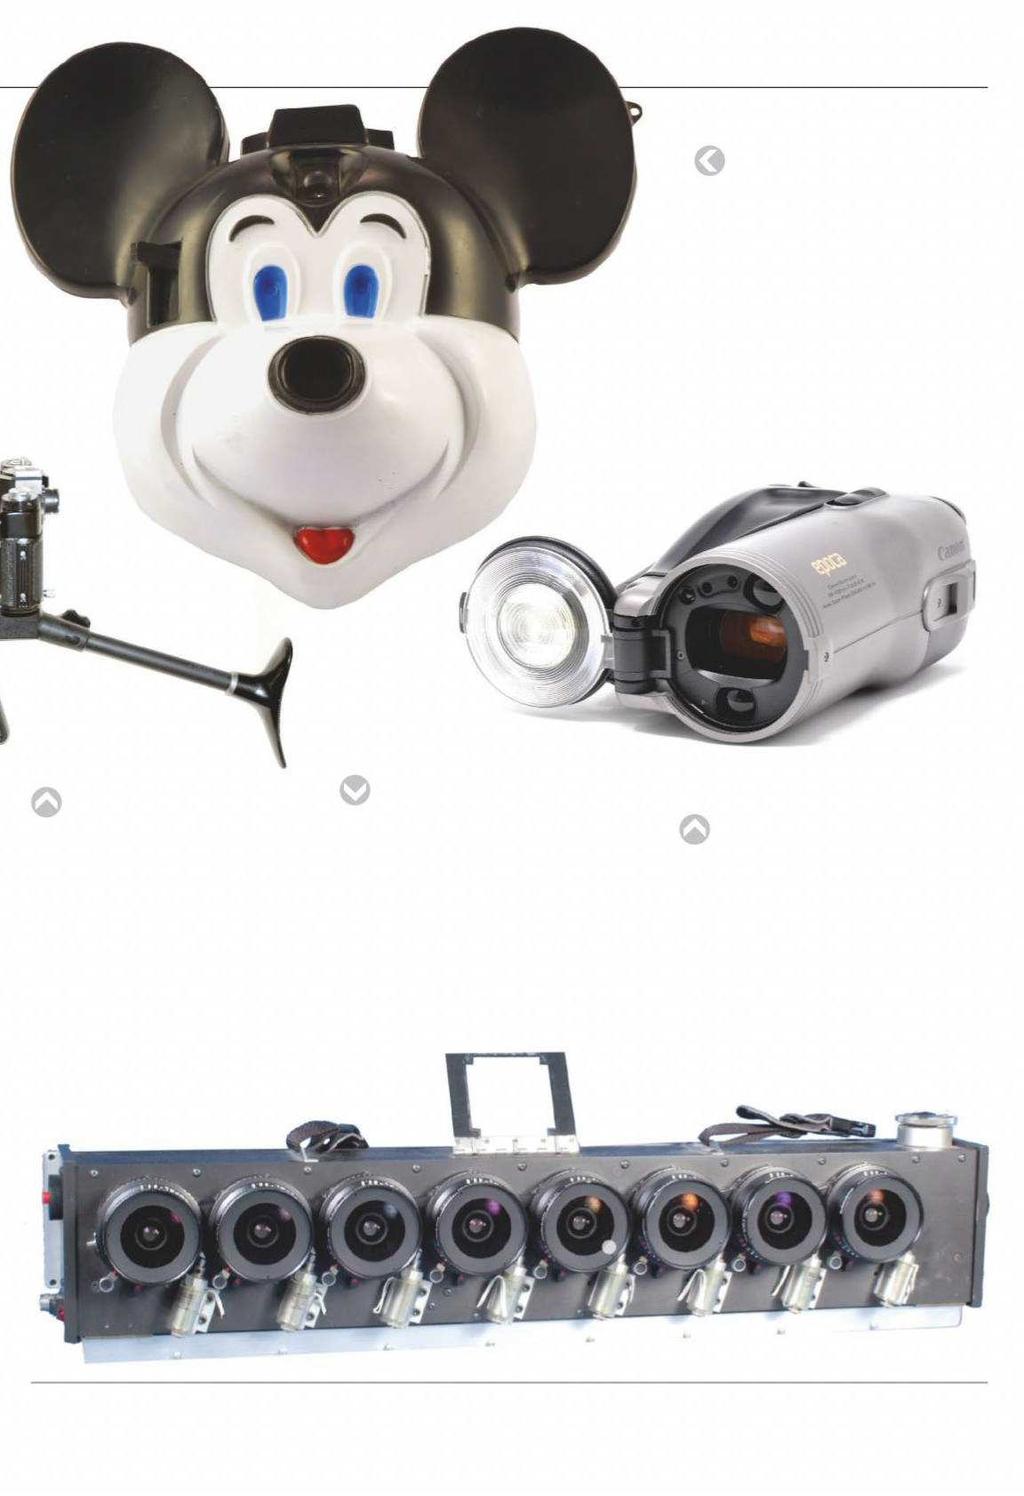 The Mick-a- Matic, made to take 126-size Instamatic film 1971 Mick-a-Matic Mickey Mouse, one of the 20th century s most iconic symbols, appeared on many cameras.